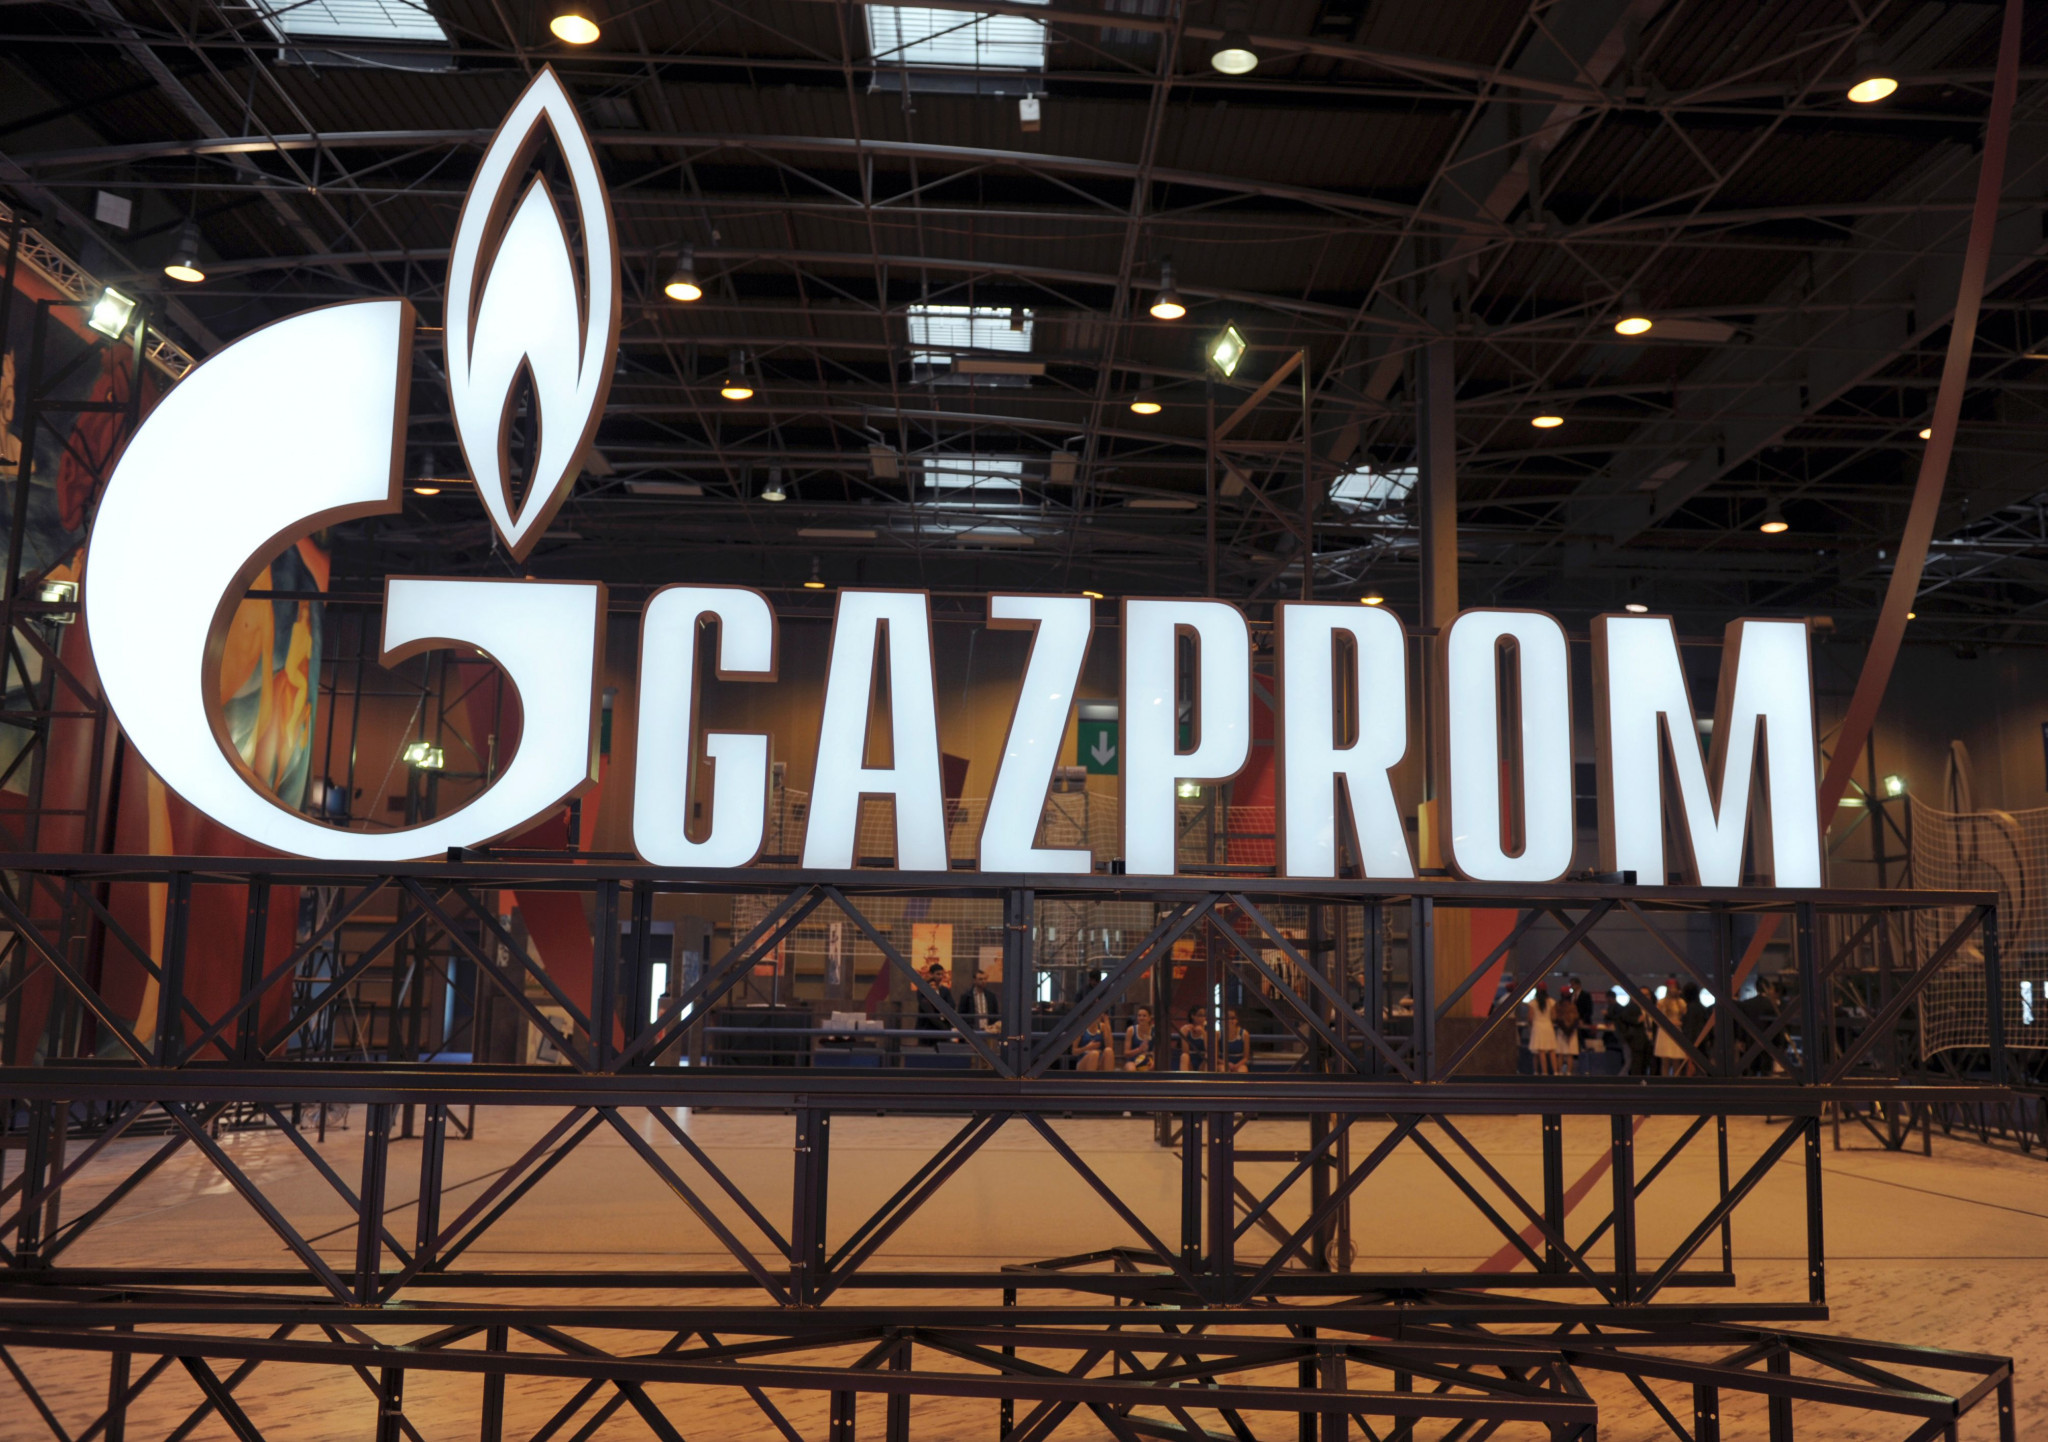 Gazprom's sponsorship with IBA has been a major talking point in the organisation's governance ©IBA